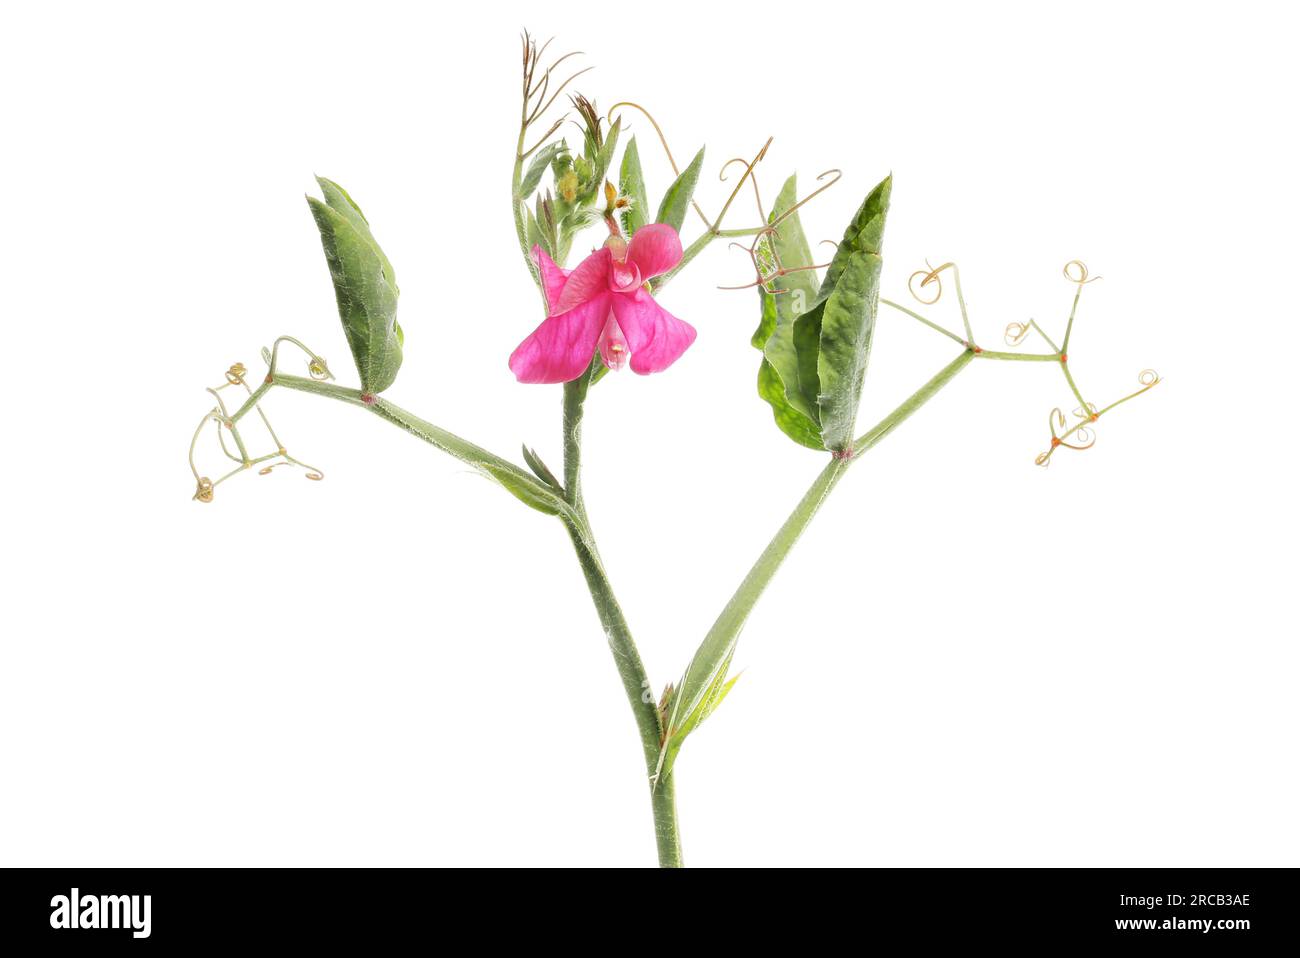 Sweet pea plant with a single red flower isolated against white Stock Photo